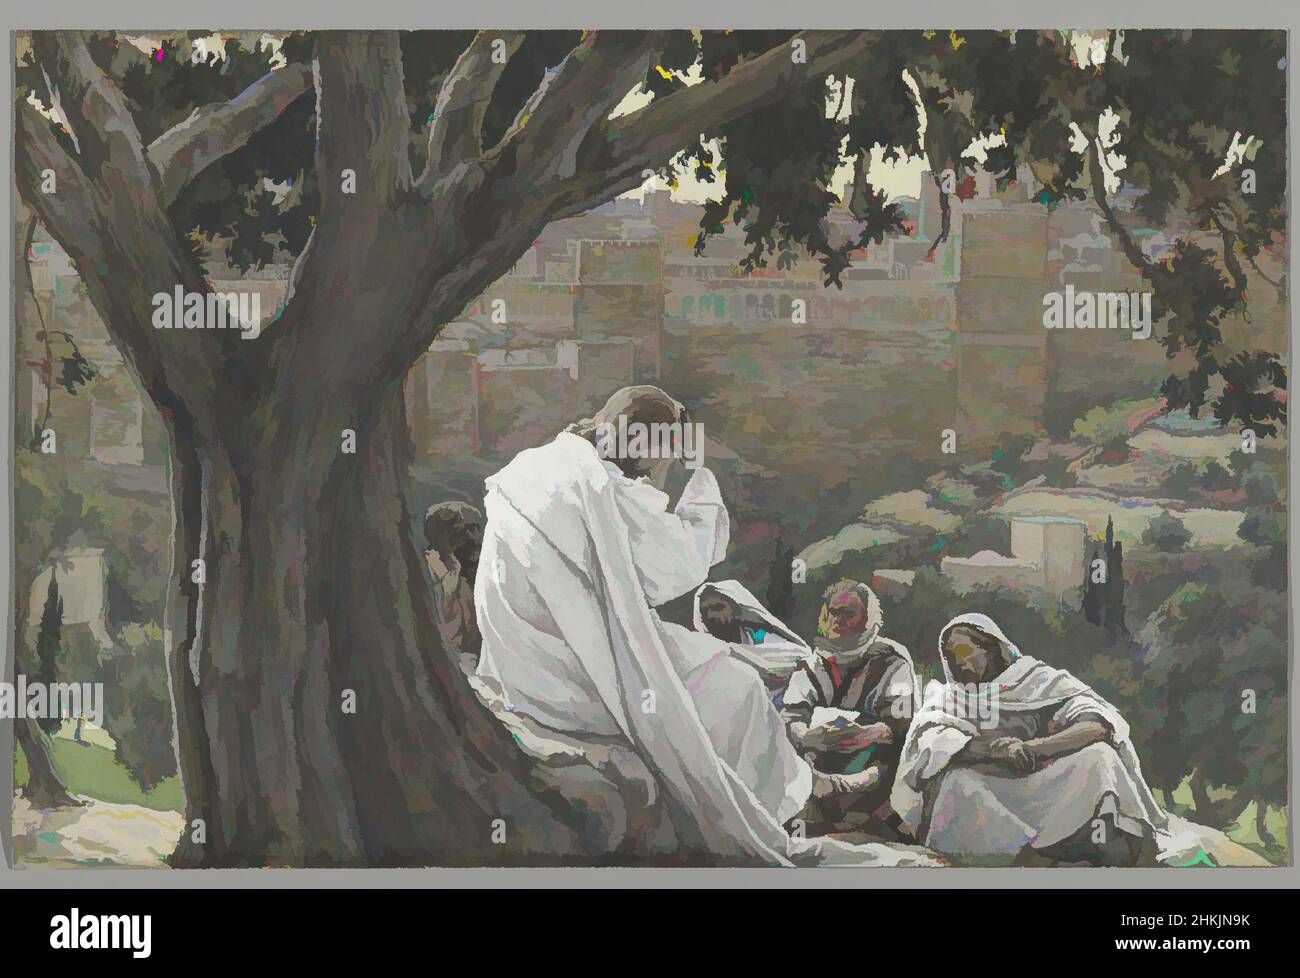 Art inspired by The Prophecy of the Destruction of the Temple, La prédication de la ruine du Temple, The Life of Our Lord Jesus Christ, La Vie de Notre-Seigneur Jésus-Christ, James Tissot, French, 1836-1902, Opaque watercolor over graphite on gray wove paper, France, 1886-1894, Image: 7, Classic works modernized by Artotop with a splash of modernity. Shapes, color and value, eye-catching visual impact on art. Emotions through freedom of artworks in a contemporary way. A timeless message pursuing a wildly creative new direction. Artists turning to the digital medium and creating the Artotop NFT Stock Photo